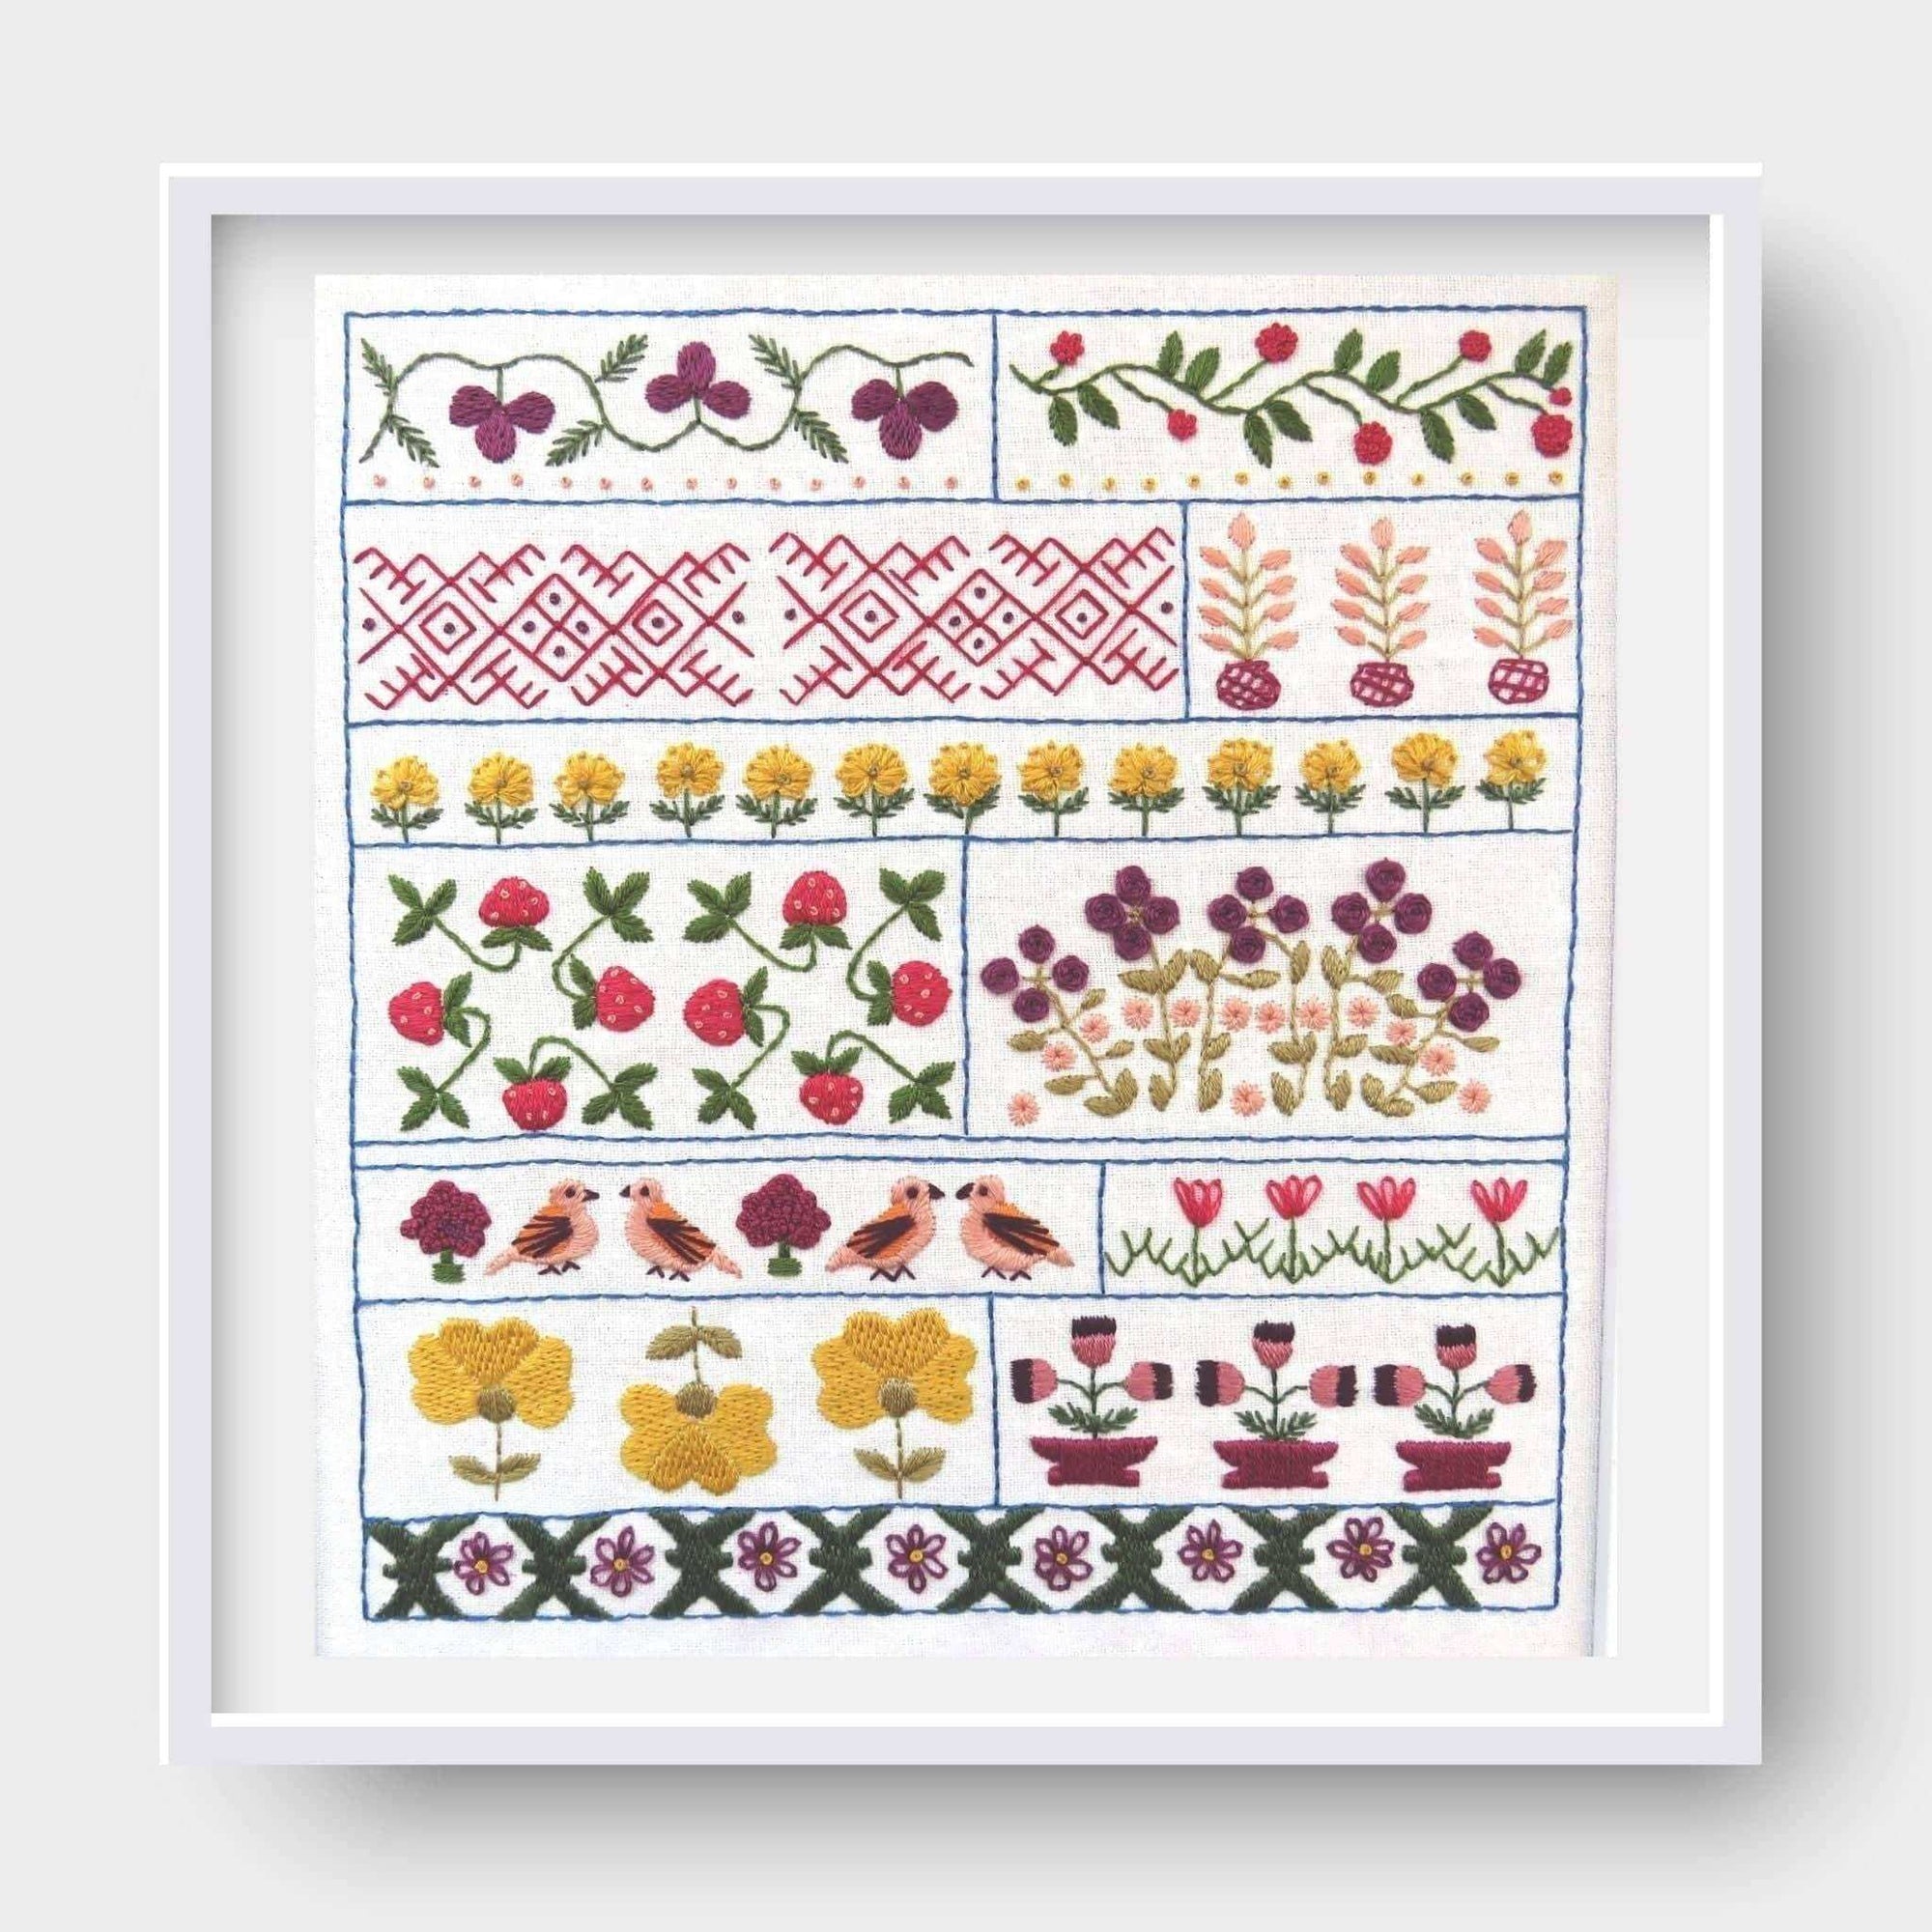 Spring Sampler, Pre Printed Embroidery Fabric Panel Pattern , Pre Printed Fabric Pattern , StitchDoodles , embroidery hoop kit, embroidery kit for adults, embroidery kit for beginers, hand embroidery, hand embroidery fabric, hand embroidery kit, PDF pattern , StitchDoodles , shop.stitchdoodles.com